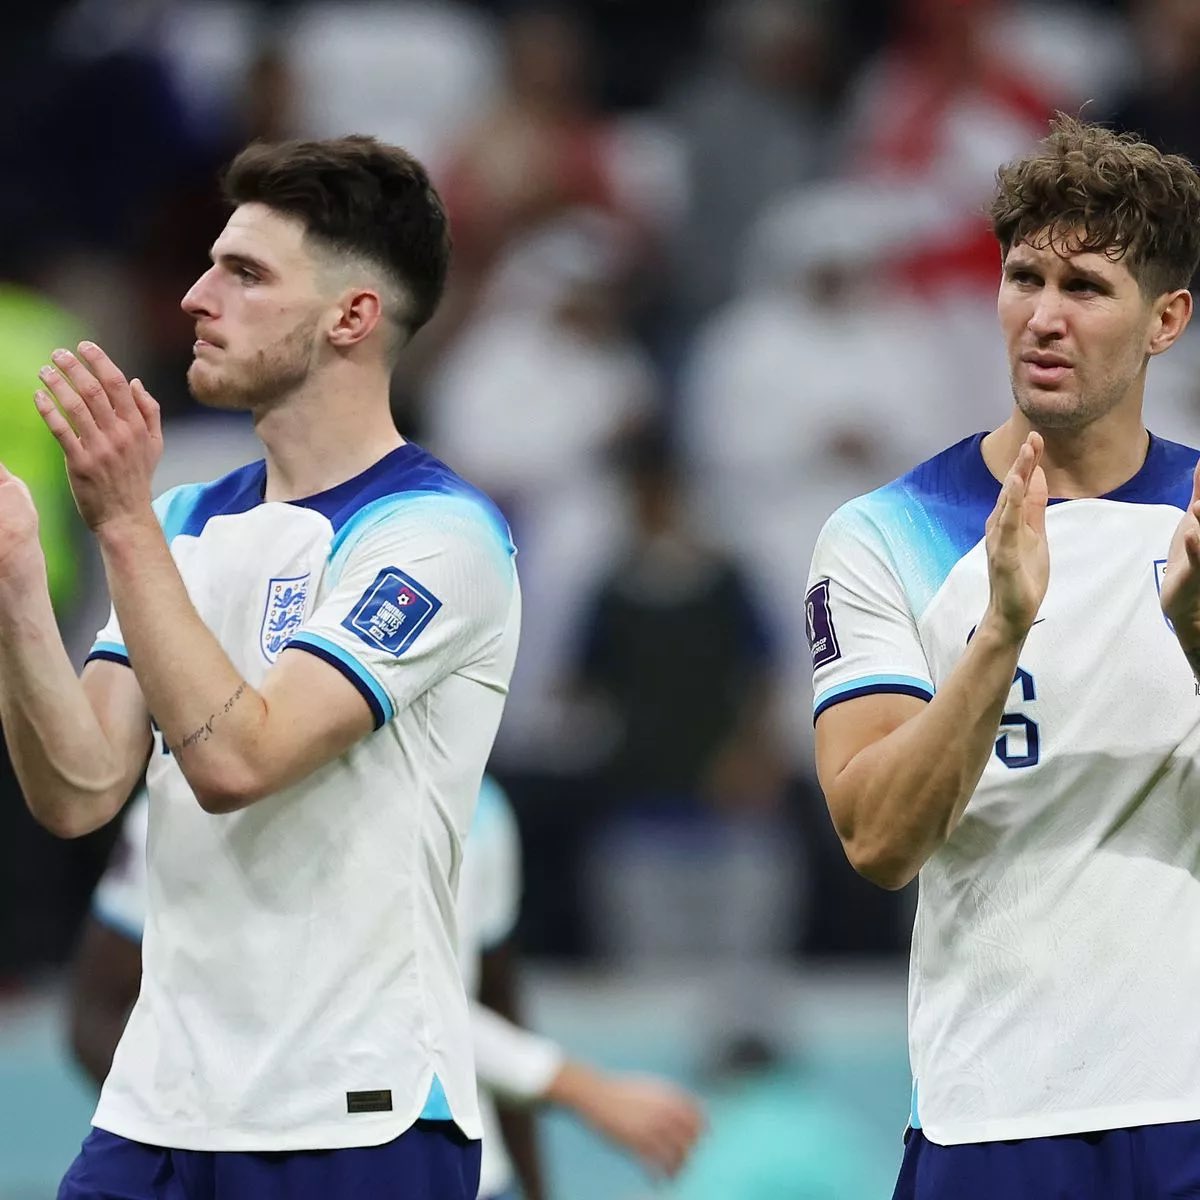 🏴󠁧󠁢󠁥󠁮󠁧󠁿 Declan Rice: “Last week I saw John Stones… he didn’t even know they were playing us next!”. “I said: big game next! John said: ‘Who are you playing?’. I said : We got you lot! John said: oh… yeah!”. “He likes to take one game at a time, I get that”, via @TelegraphSport.